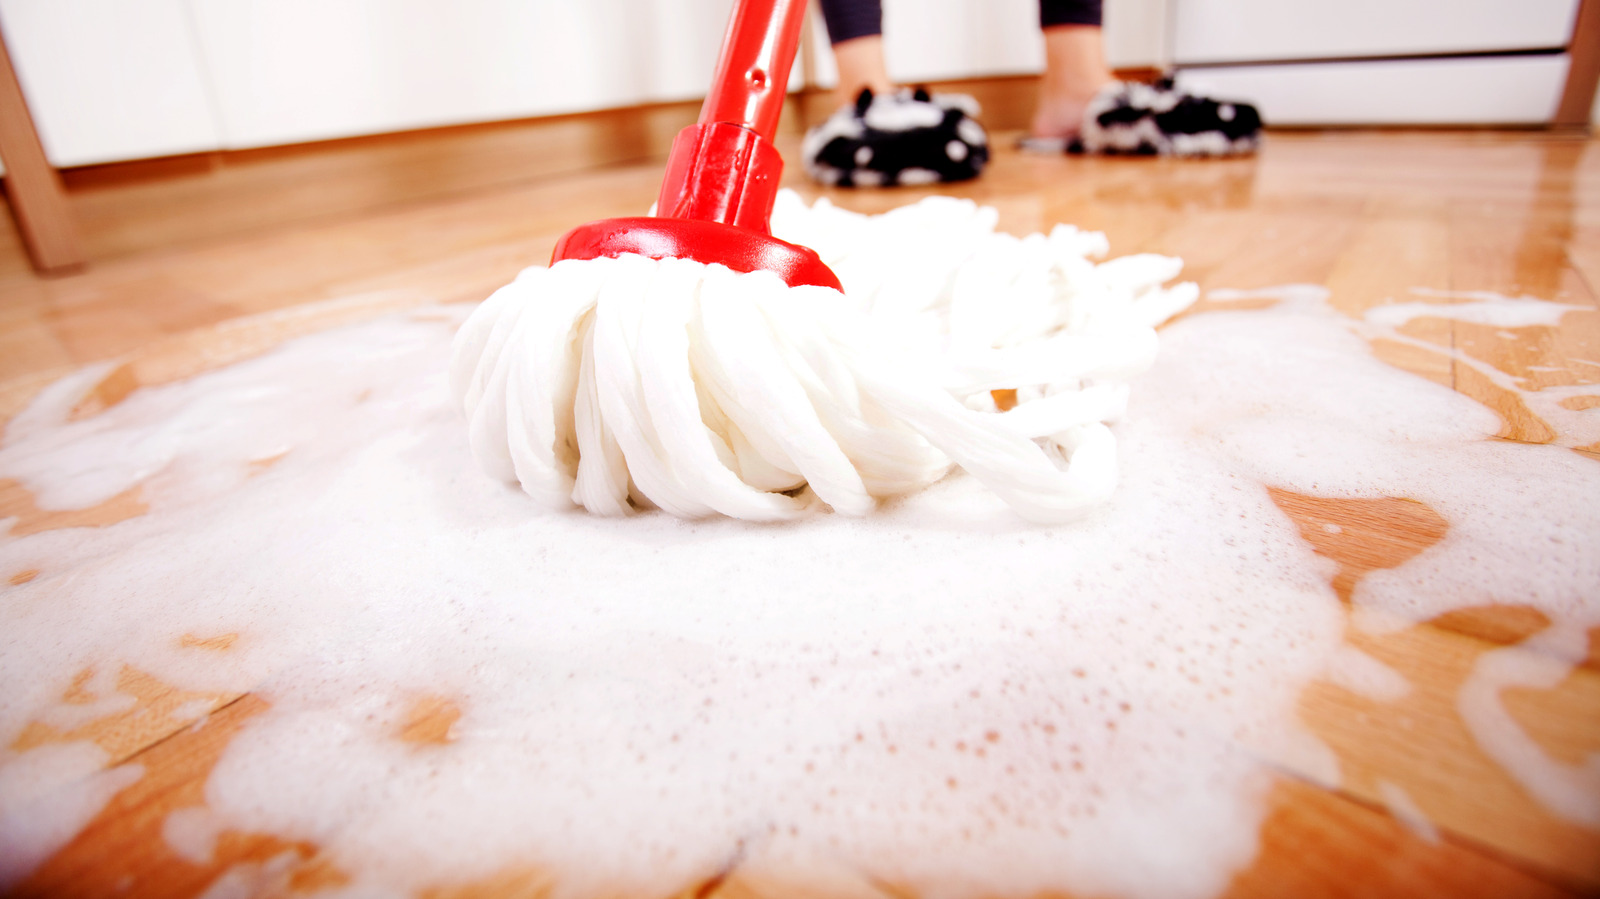 https://www.housedigest.com/img/gallery/why-you-should-think-twice-before-using-tiktoks-latest-mopping-trend/l-intro-1689196117.jpg